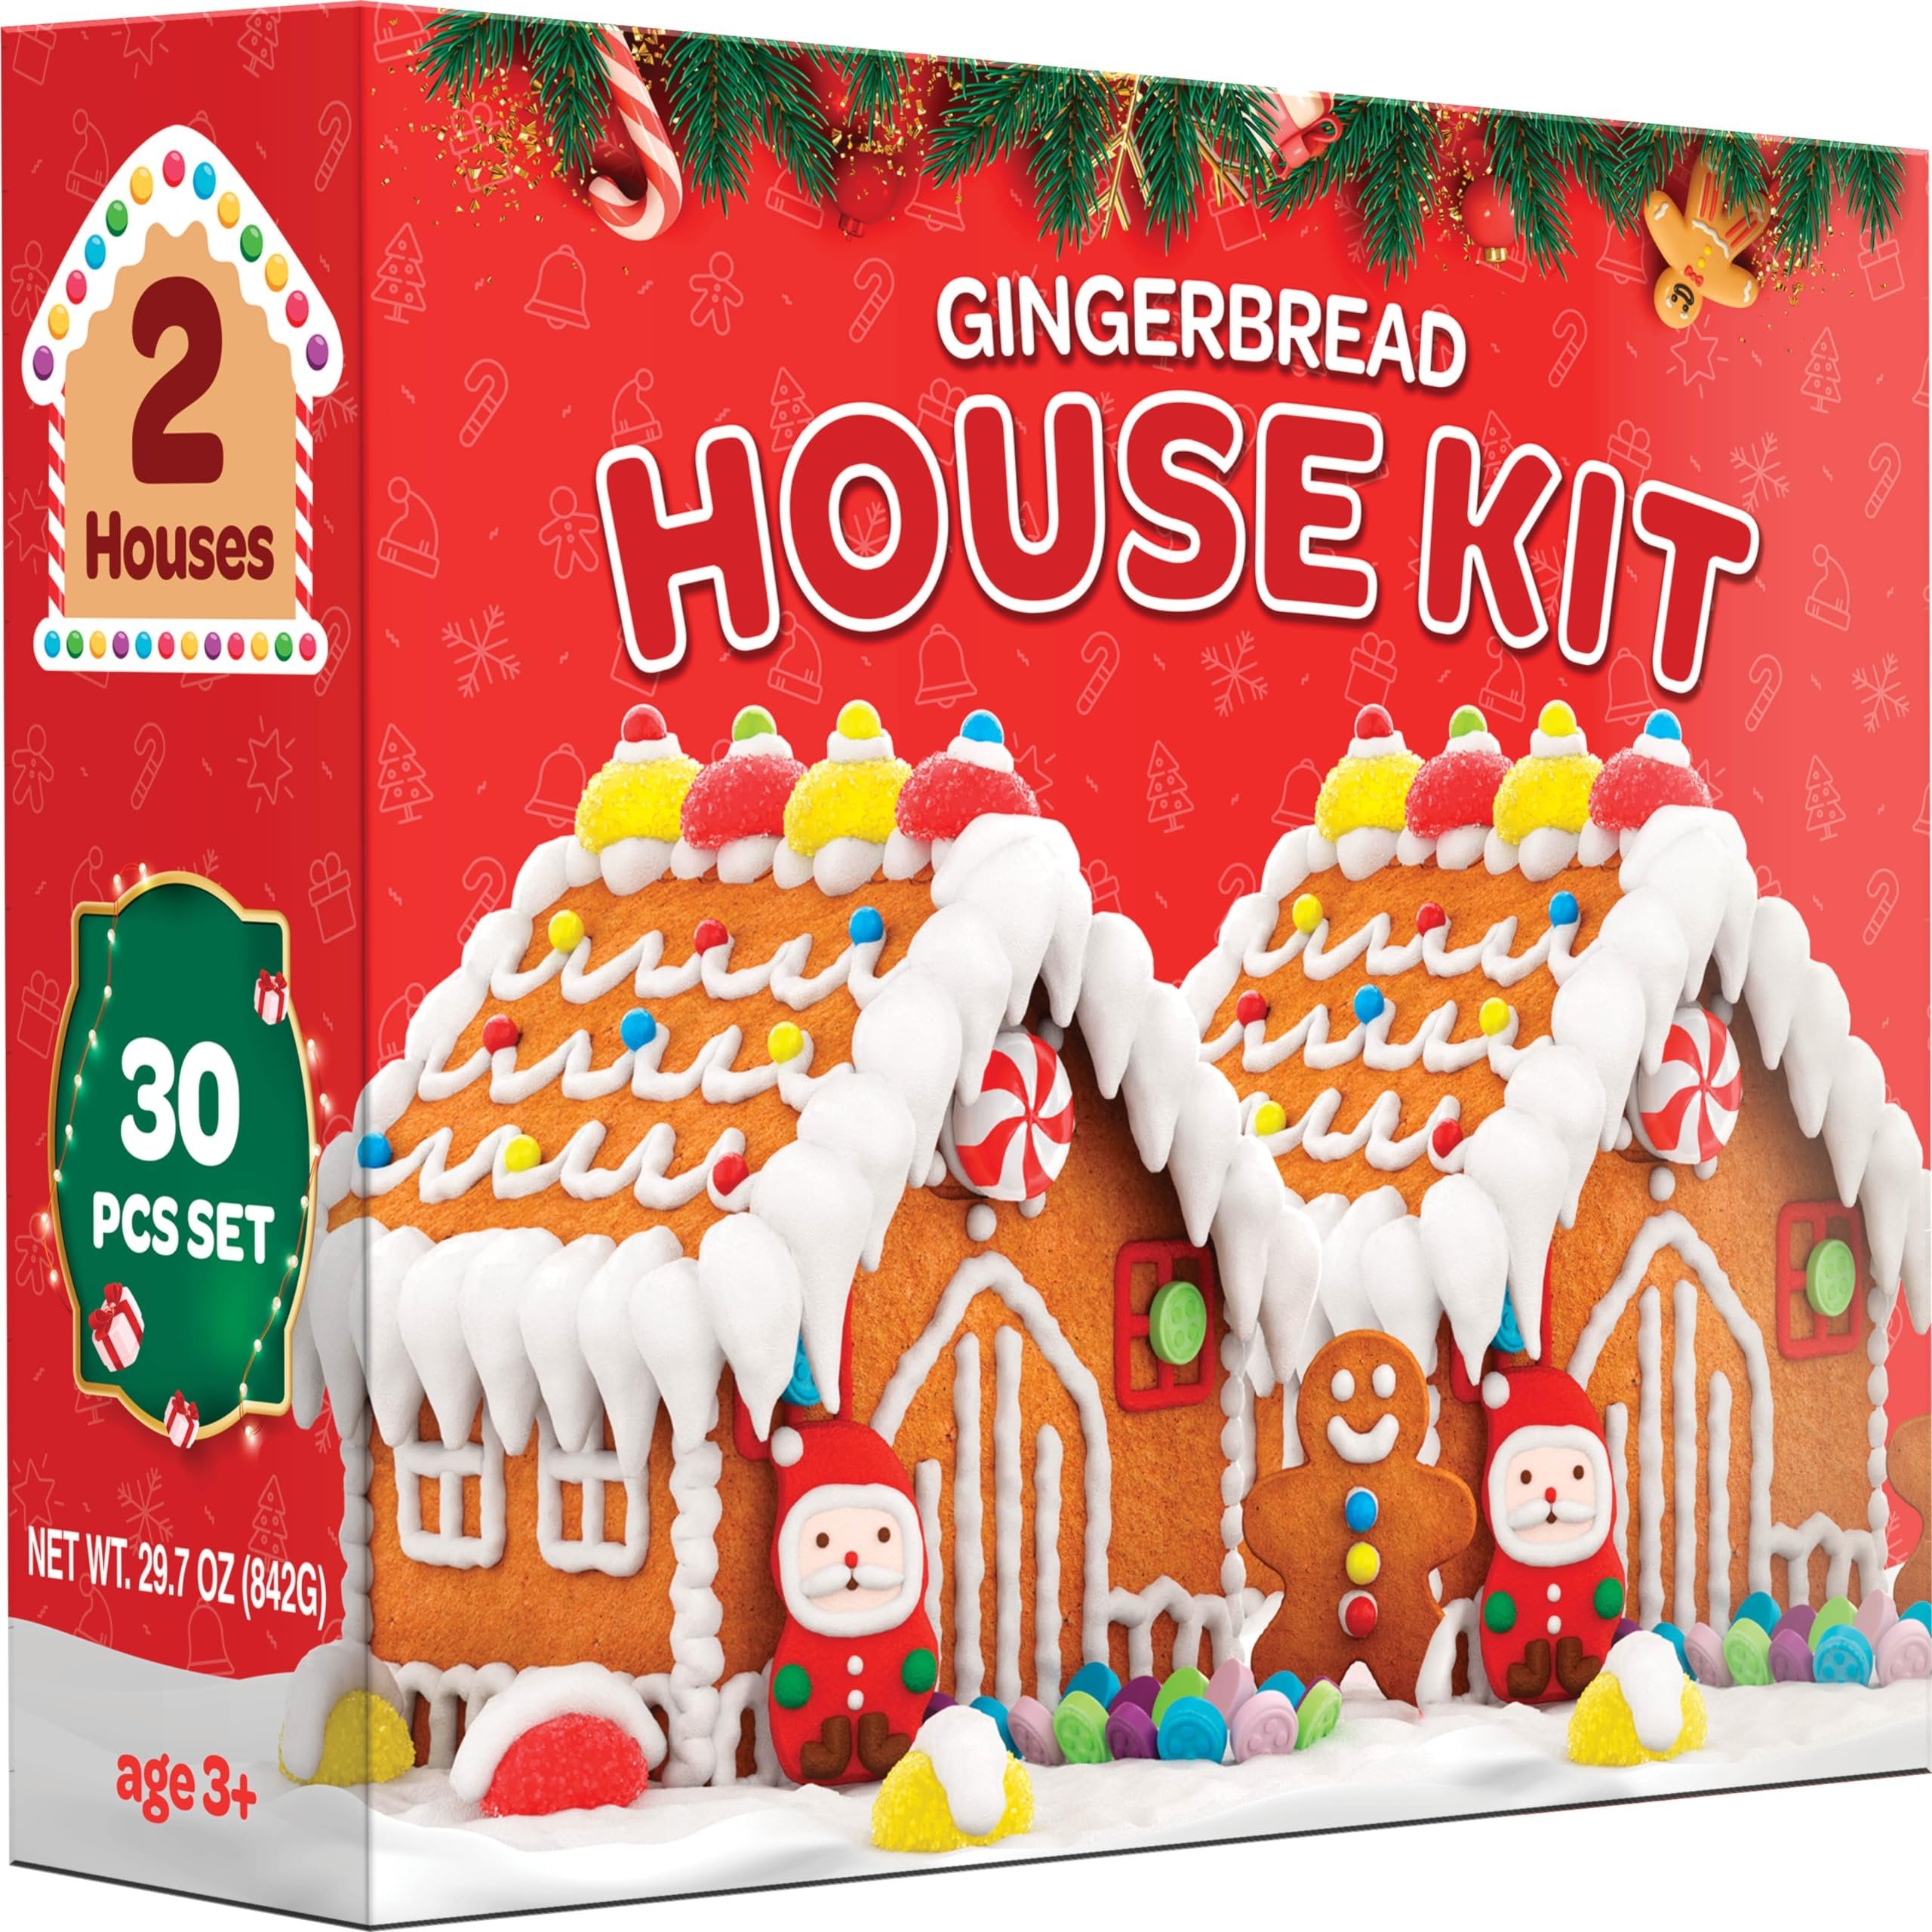 Gingerbread House kit [Set of 2] DIY Gingerbread House, Fun Holiday Activity for Kids, Ease Crafted Grooves Decor Kit of 2 Houses/4 ppl/Fondant/Snowflakes/Candies/Jellies/Beads/Buttons/Tray 30 Pcs Set